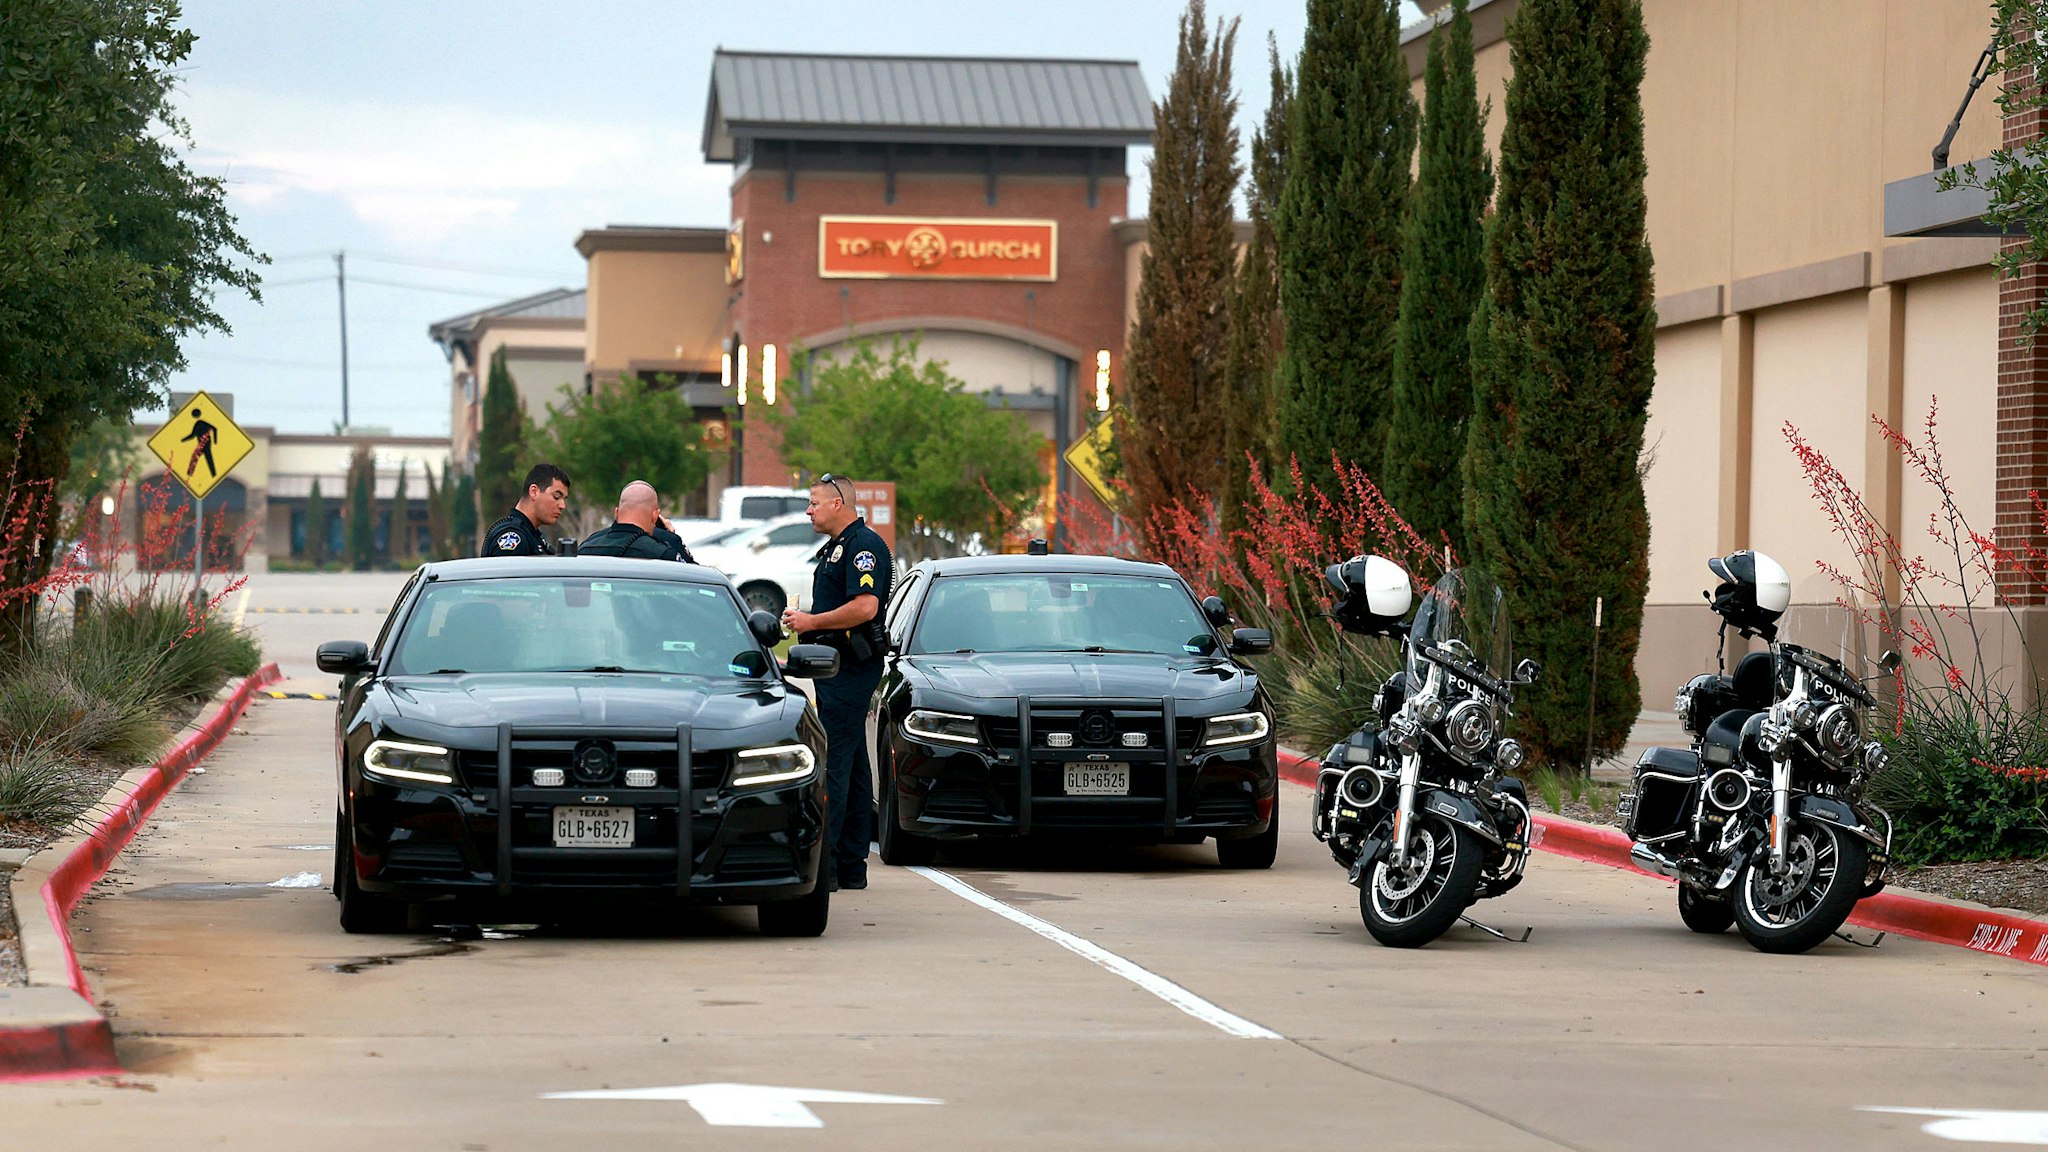 ALLEN, TEXAS - MAY 08: Police block an entrance to the Allen Premium Outlets mall after the mass shooting occurred on May 8, 2023 in Allen, Texas. On May 6th, a shooter opened fire at the outlet mall, killing eight people. The gunman was then killed by an Allen Police officer responding to an unrelated call.